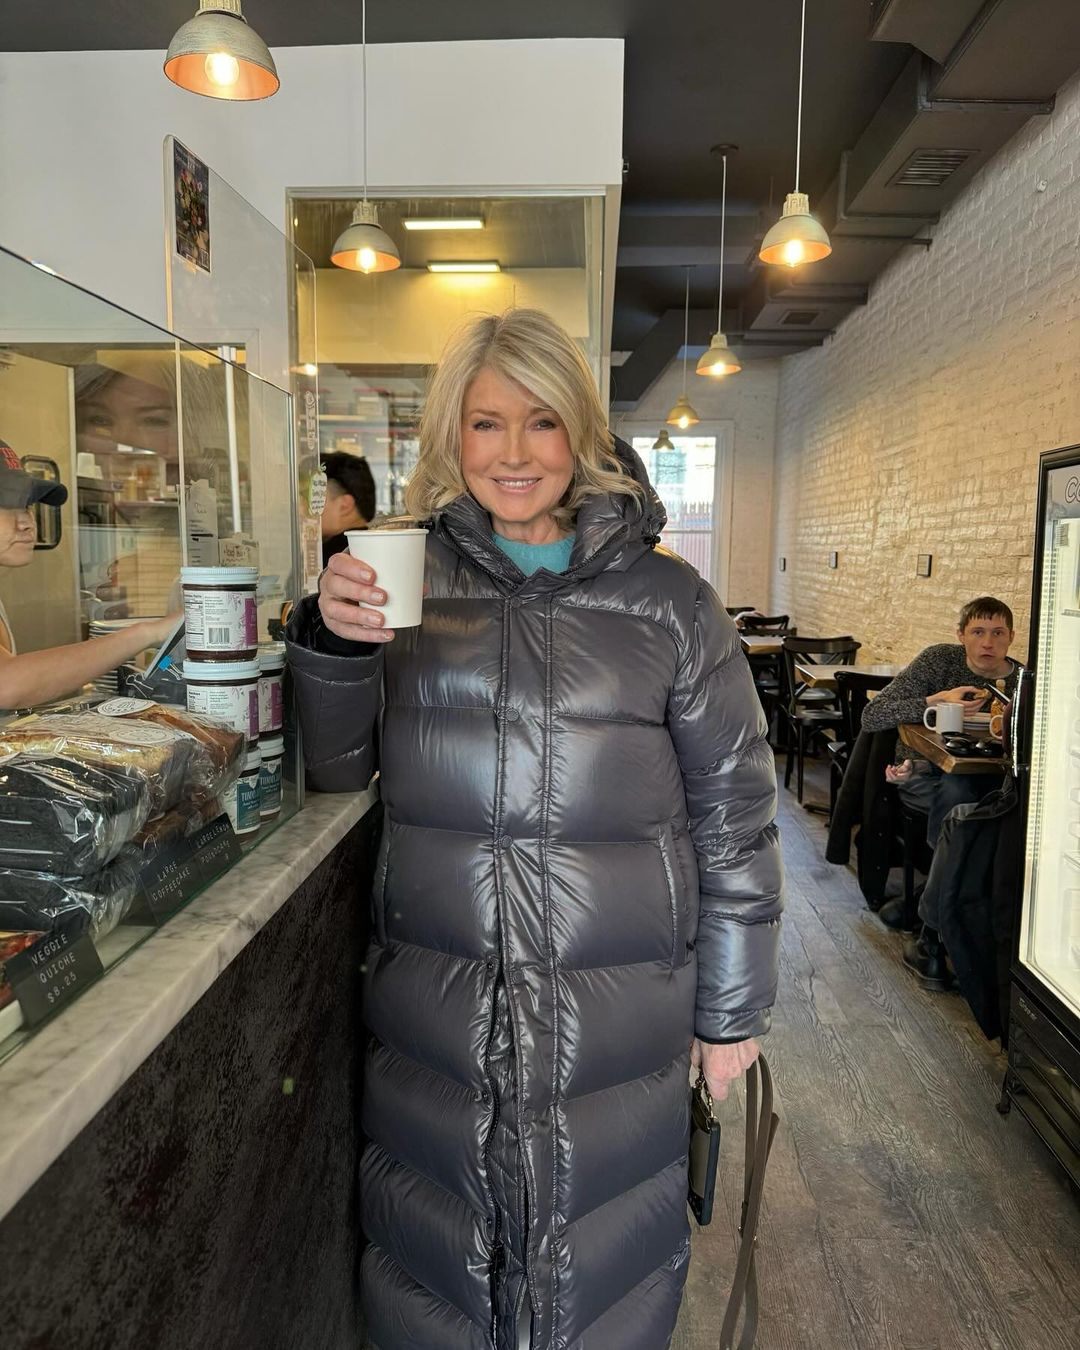 Martha Stewart holding up a cup of coffee in a coffee shop while wearing a winter jacket.